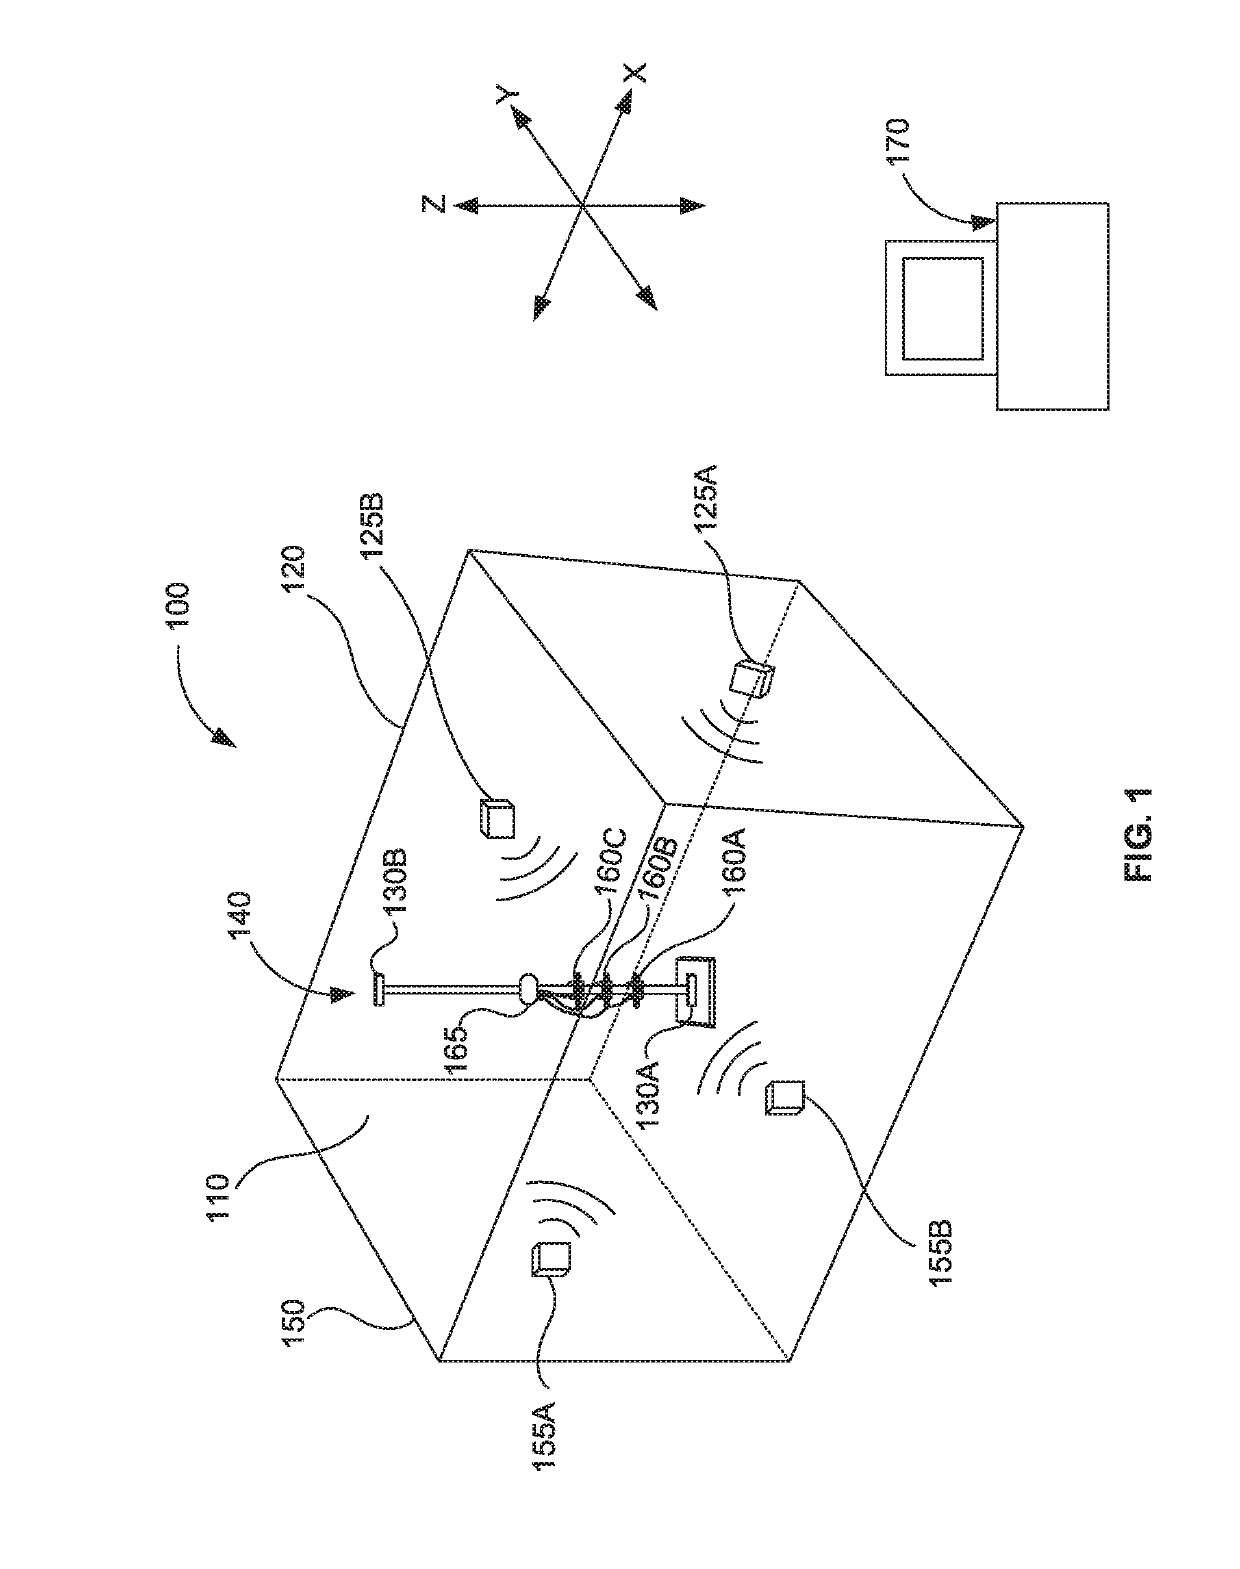 Calibration system and method for magnetic tracking in virtual reality systems